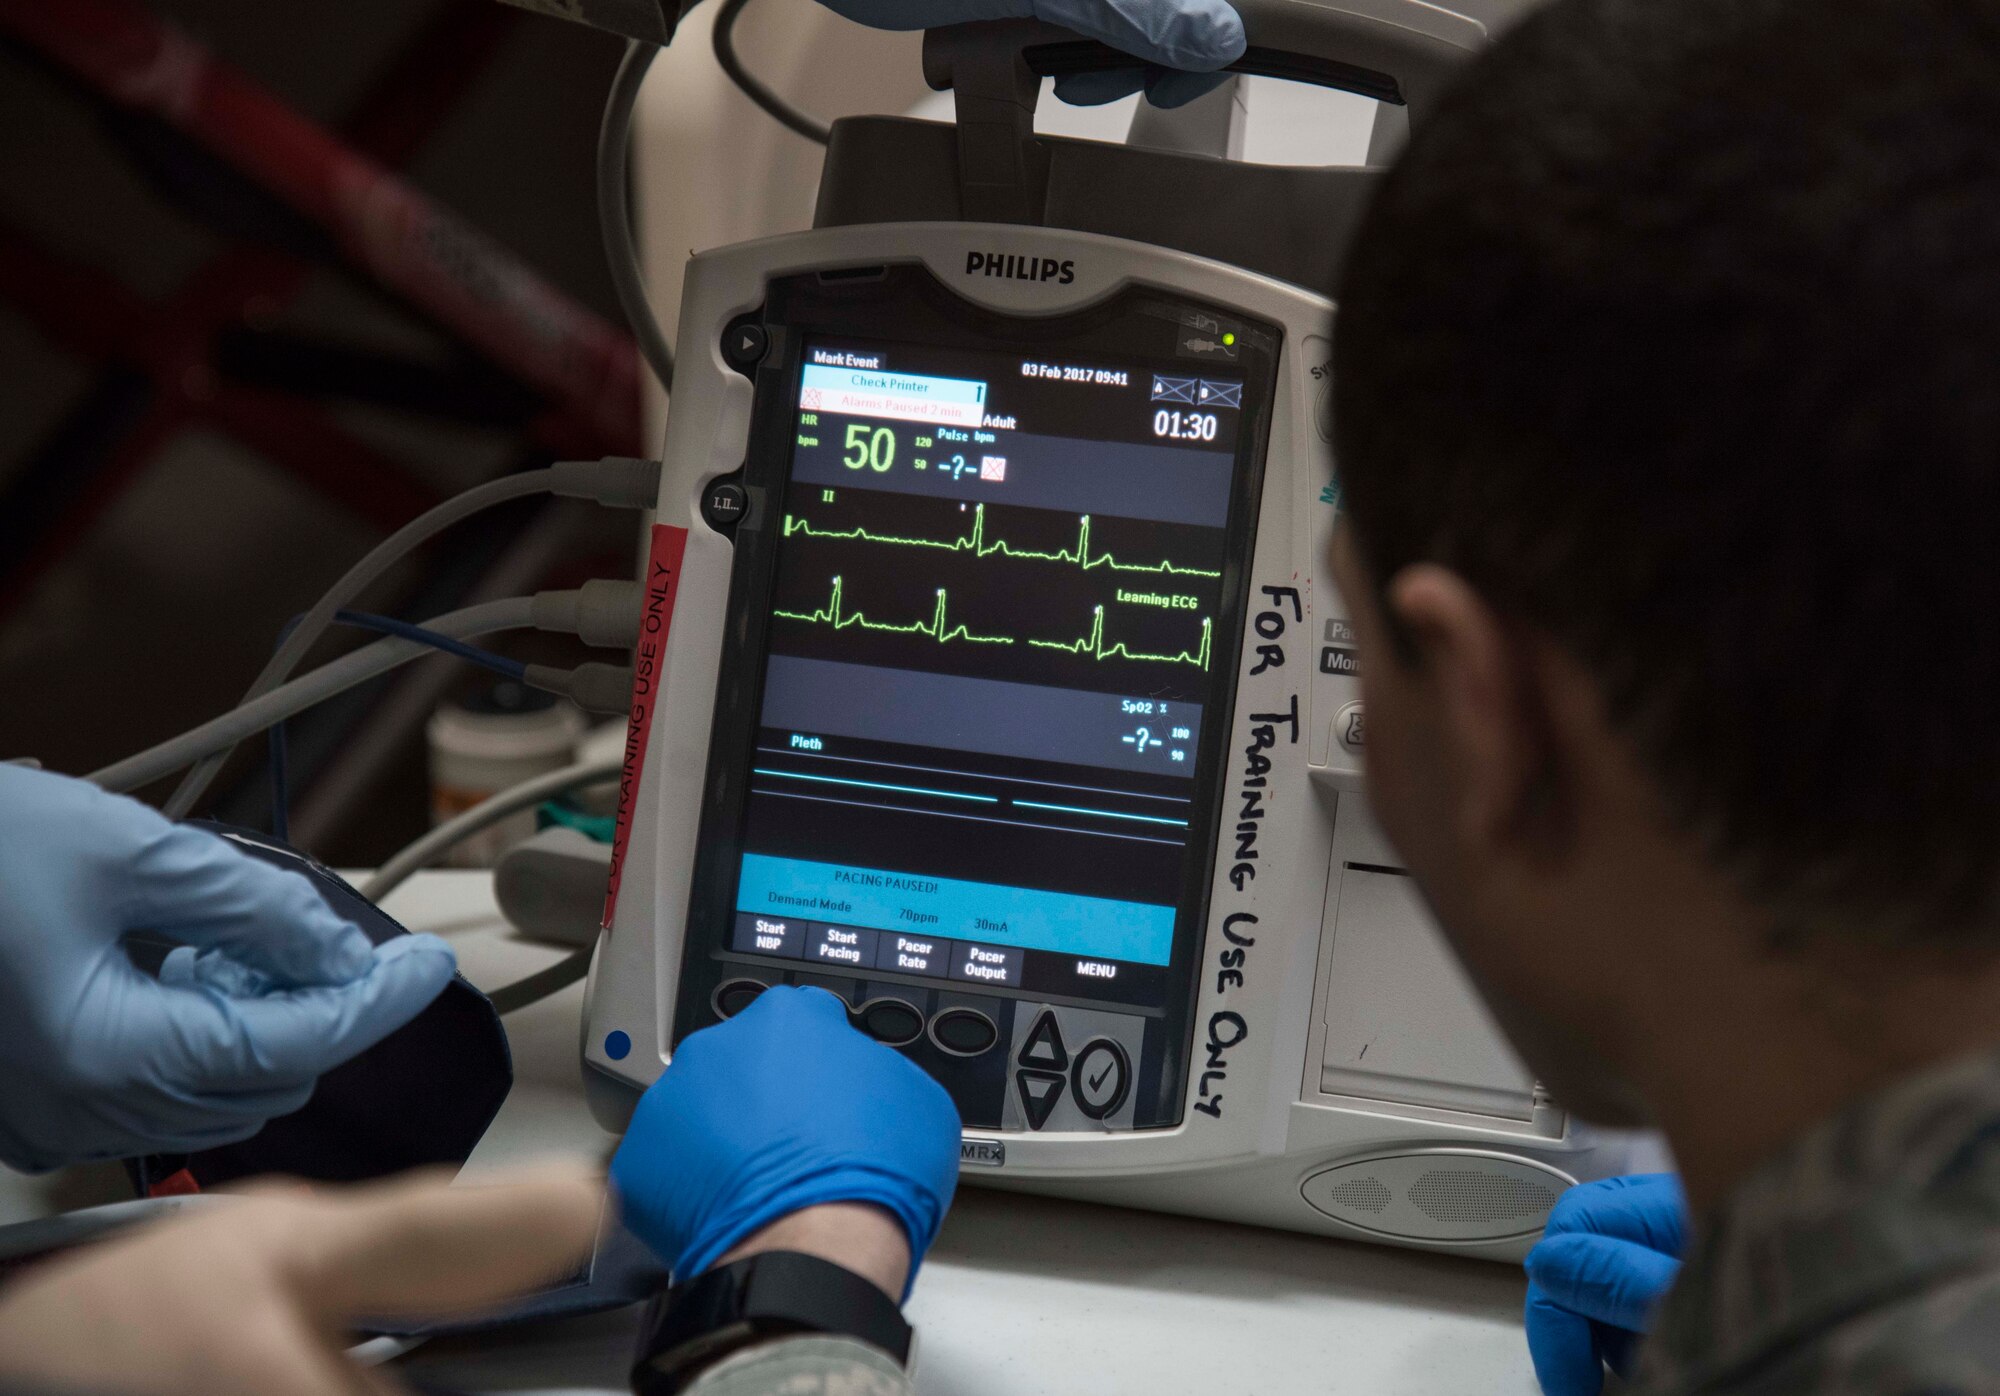 U.S. Air Force Airmen with the 35th Medical Group, prepare a Philips HeartStart MRx defibrillator and heart monitor during training at Misawa Air Base, Japan, Feb. 3, 2017.  The tool includes automated external defibrillation capabilities with patient monitoring attributes allowing technicians to clearly assess the situation at all times. (U.S. Air Force photo by Airman 1st Class Sadie Colbert)